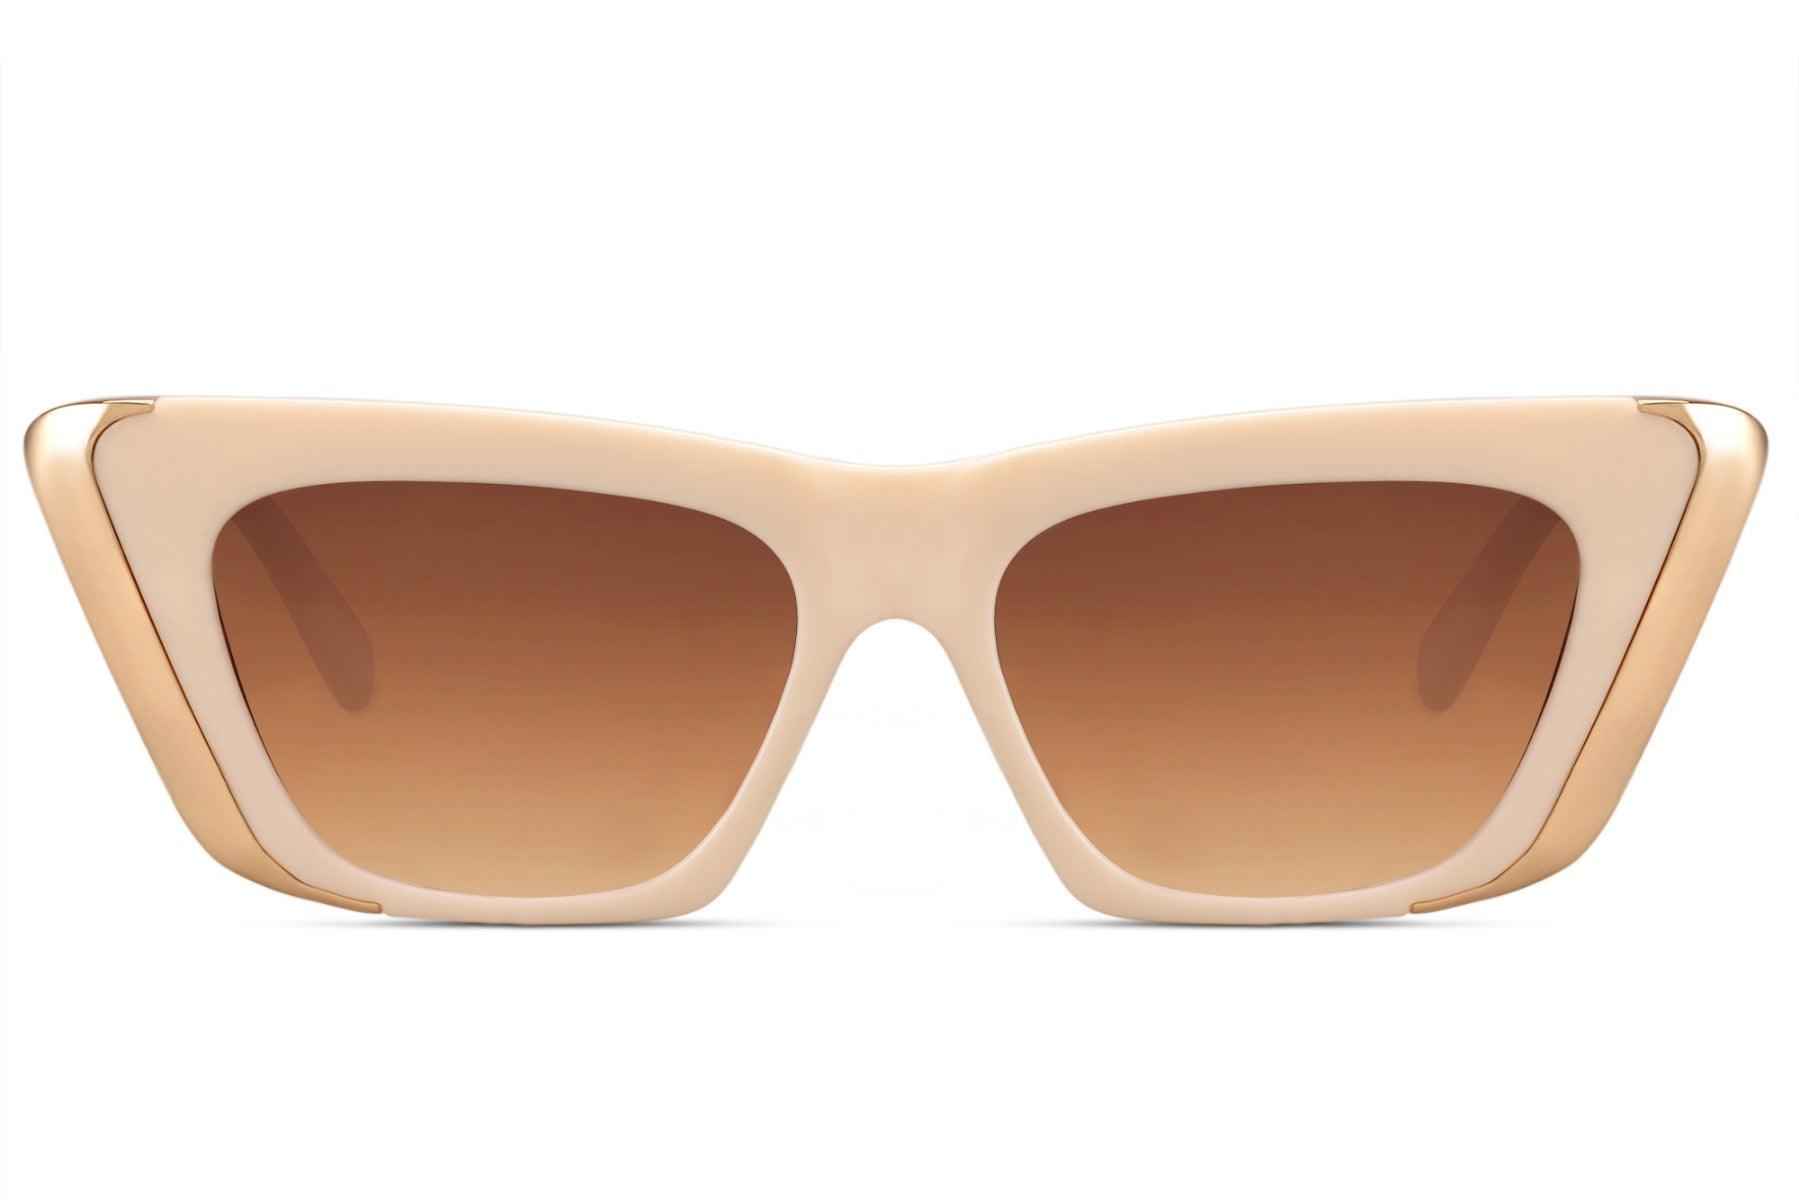 Nao Cat Eye Beige & Gold Sunglasses - Blissfully Brand - Futuristic Cyber Retro Funky Gold Trimming Thick